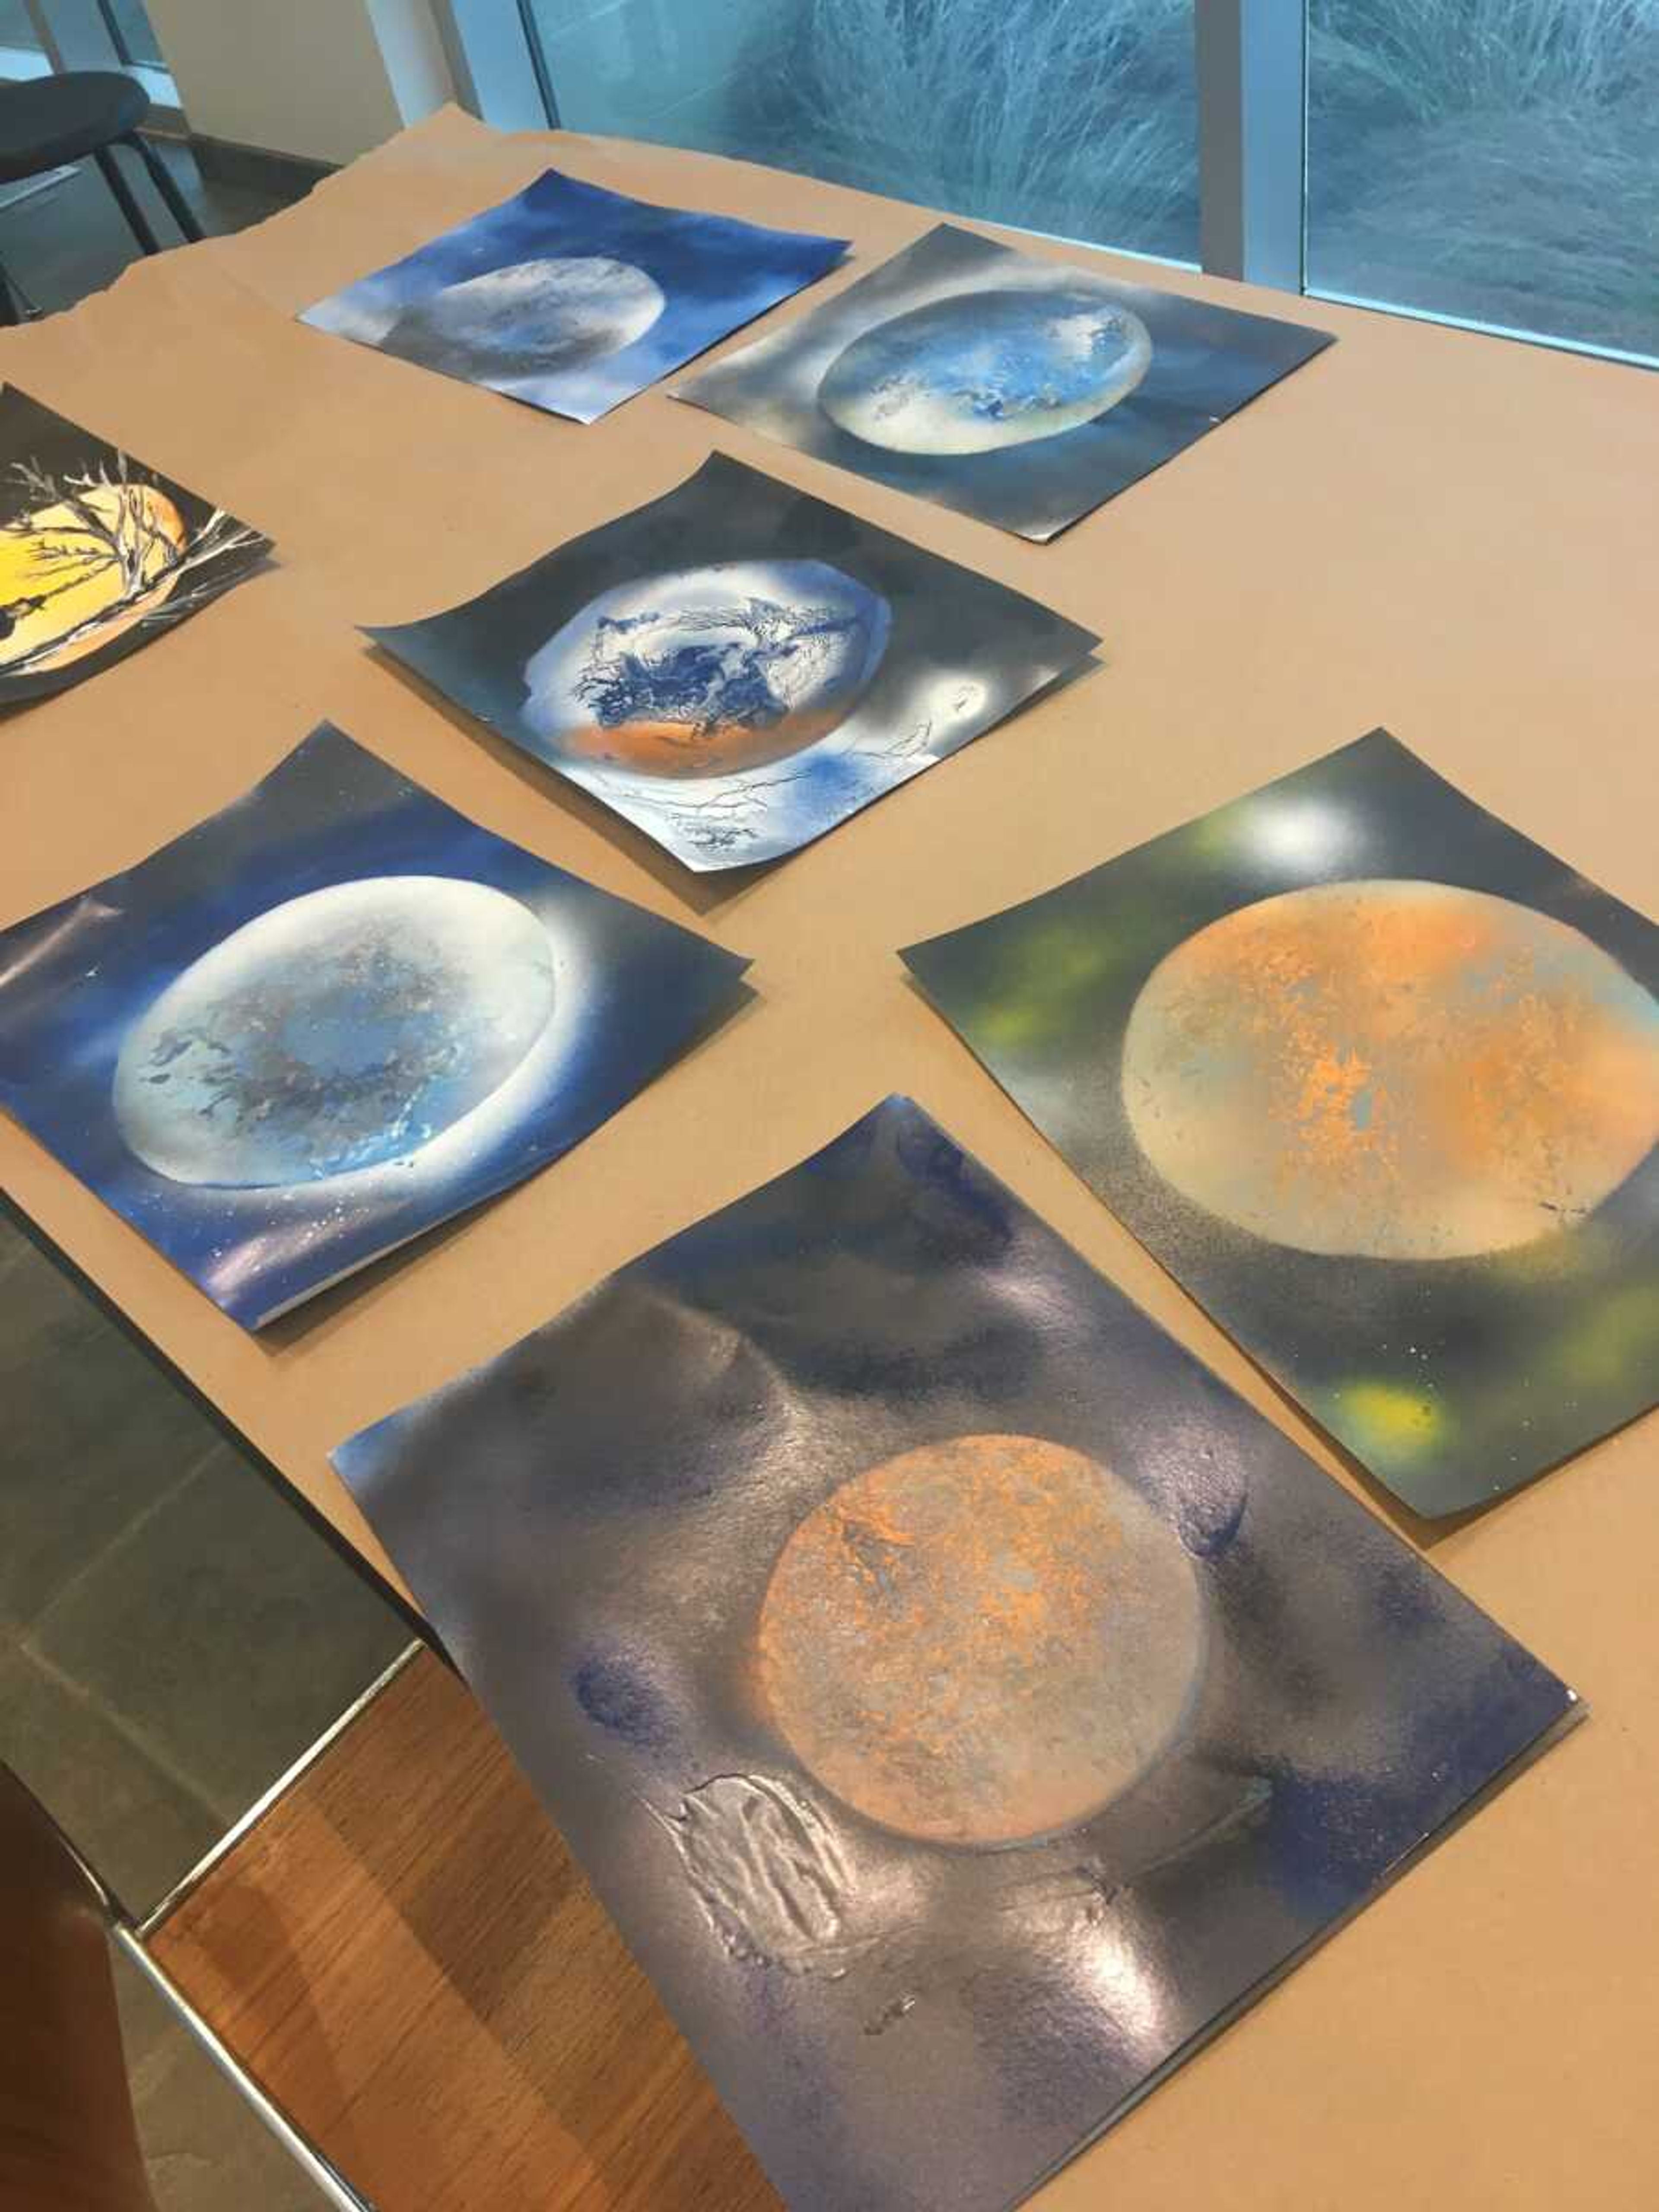 Visitors to Crisp Museum’s Heritage Days event could create a full moon and tree scene using spray paint and acrylics.